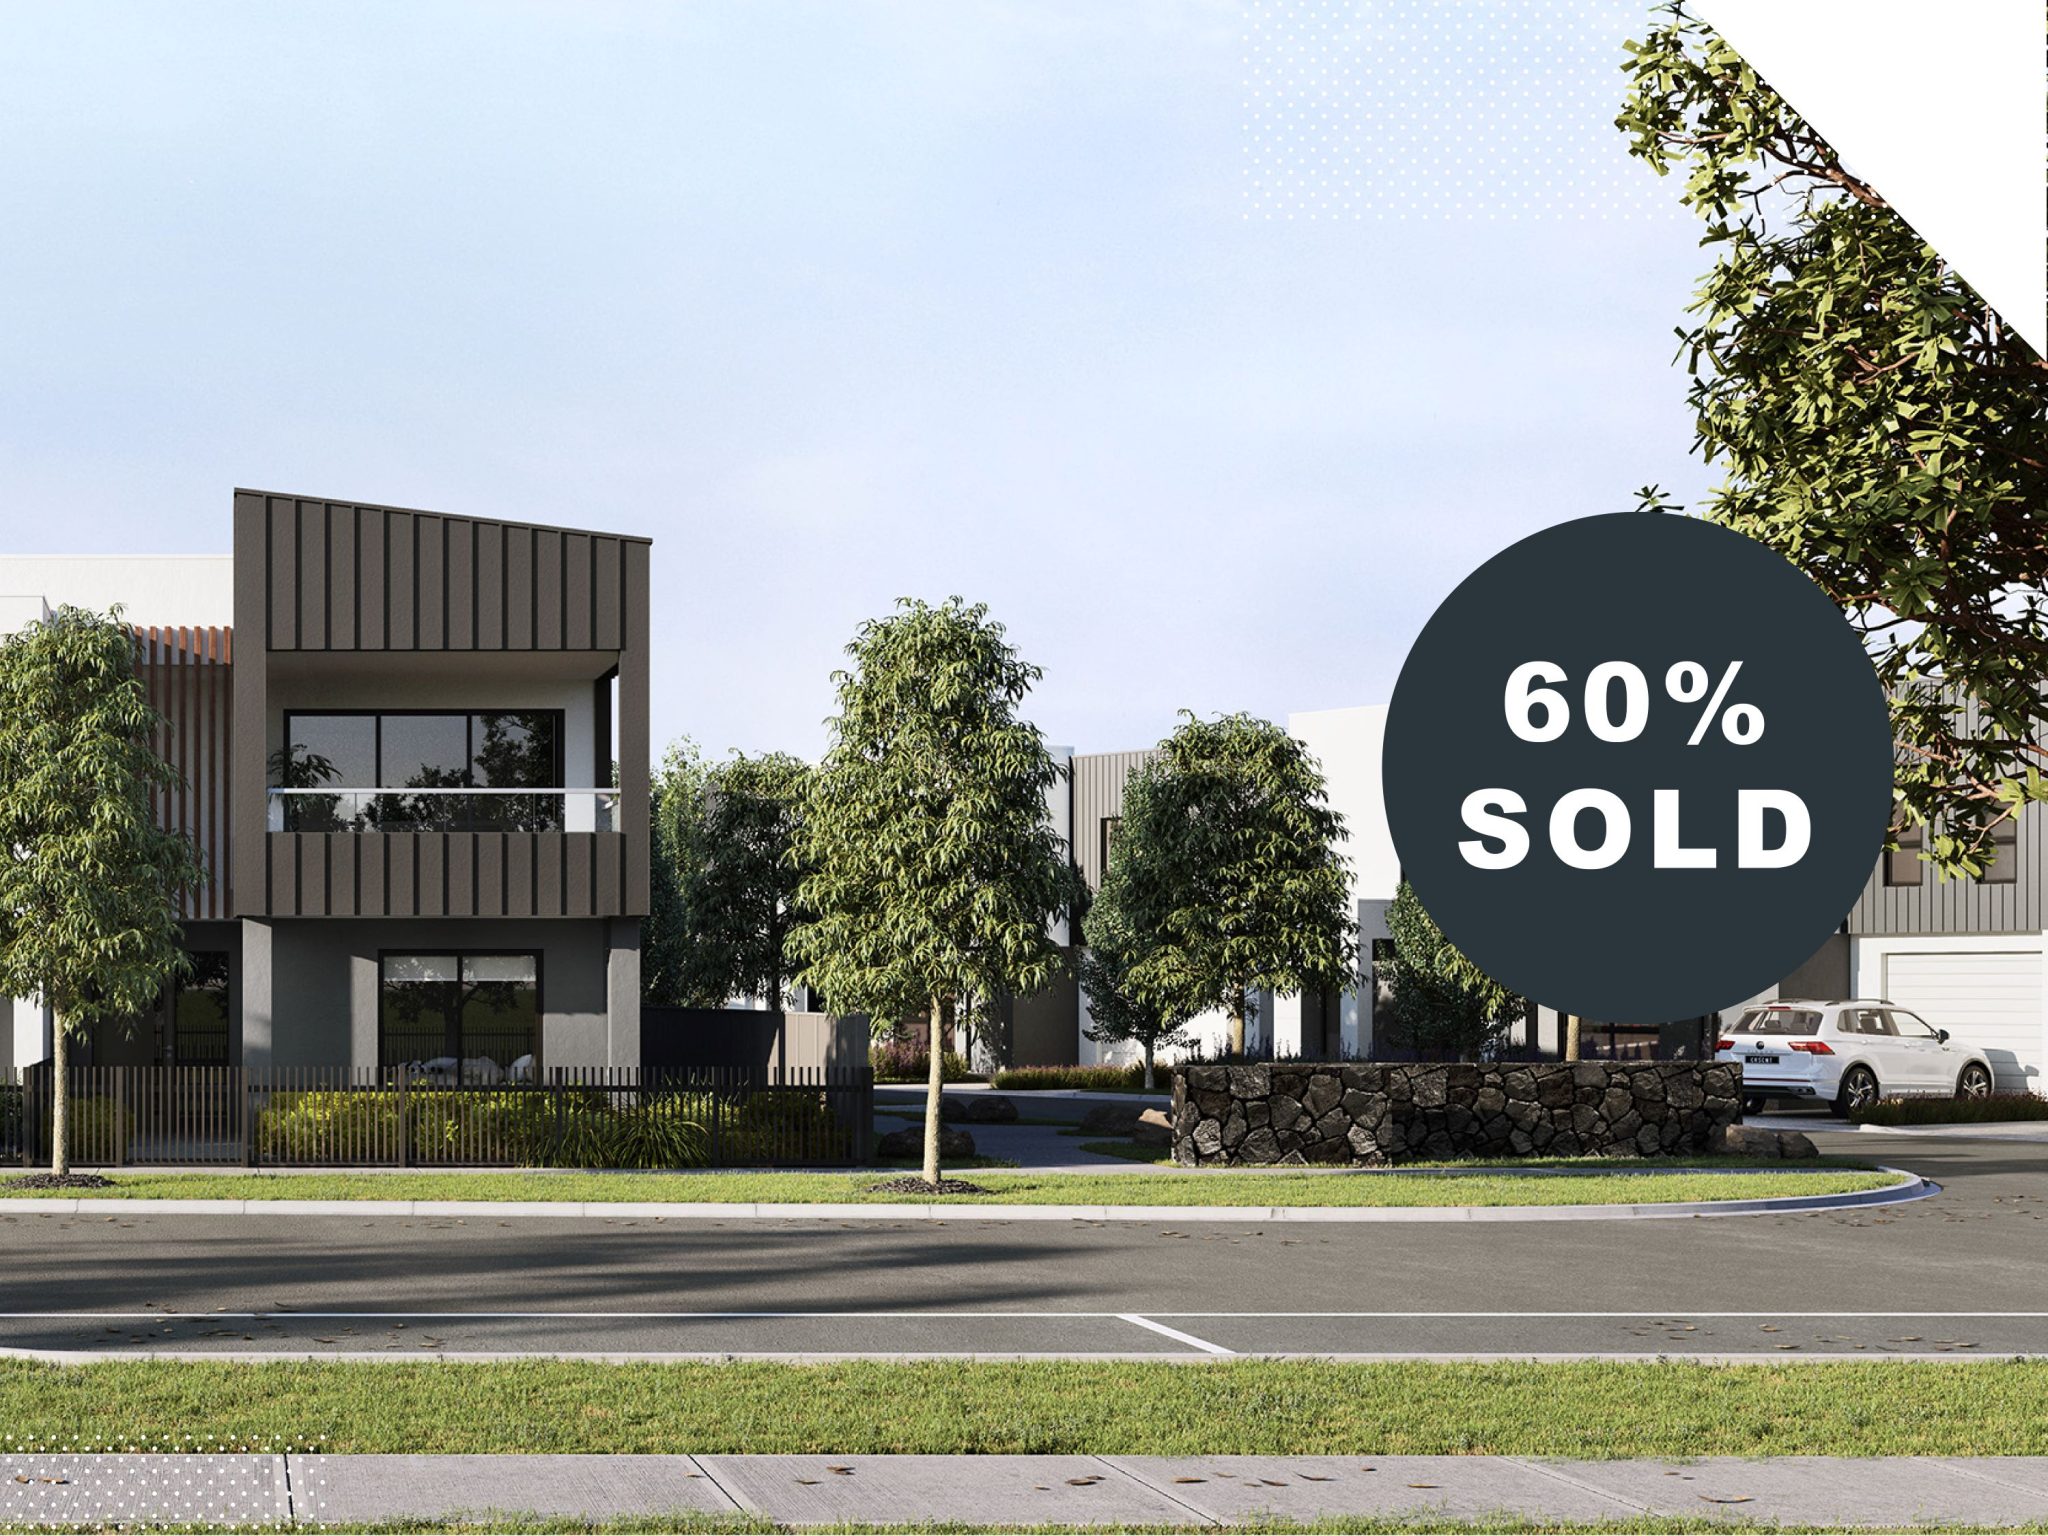 60% Sold! The Crescent is Booming!